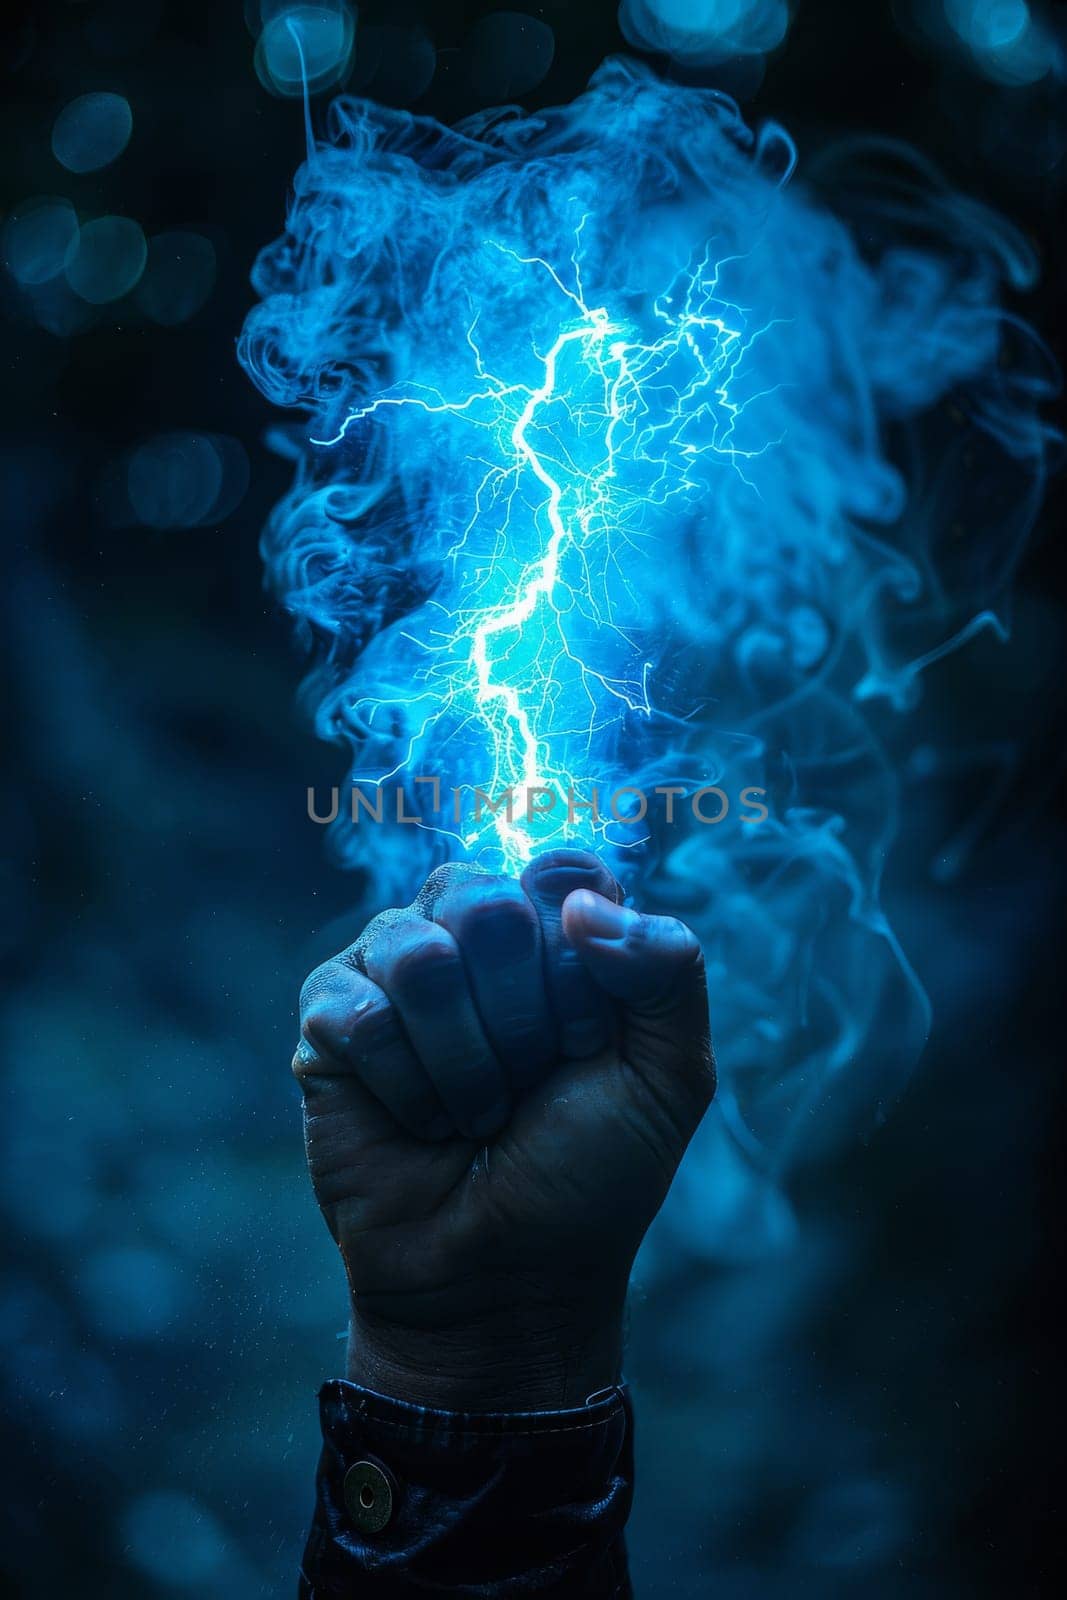 A hand is holding a blue lightning bolt. The image has a mood of excitement and power. The blue color of the lightning bolt and the hand creates a sense of energy and movement